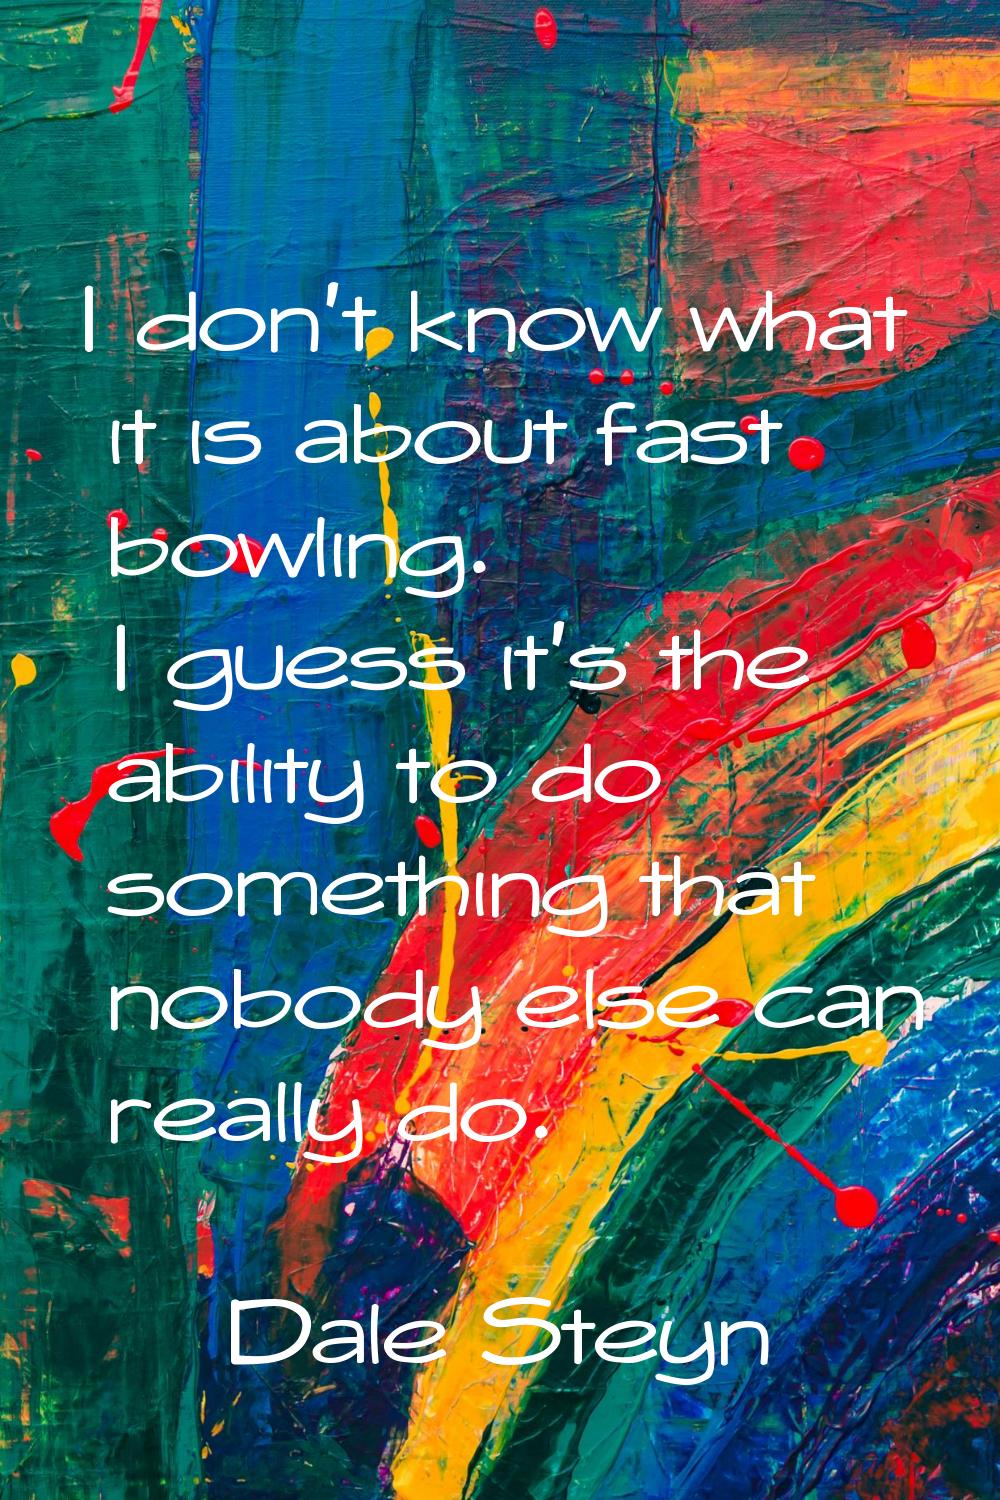 I don't know what it is about fast bowling. I guess it's the ability to do something that nobody el